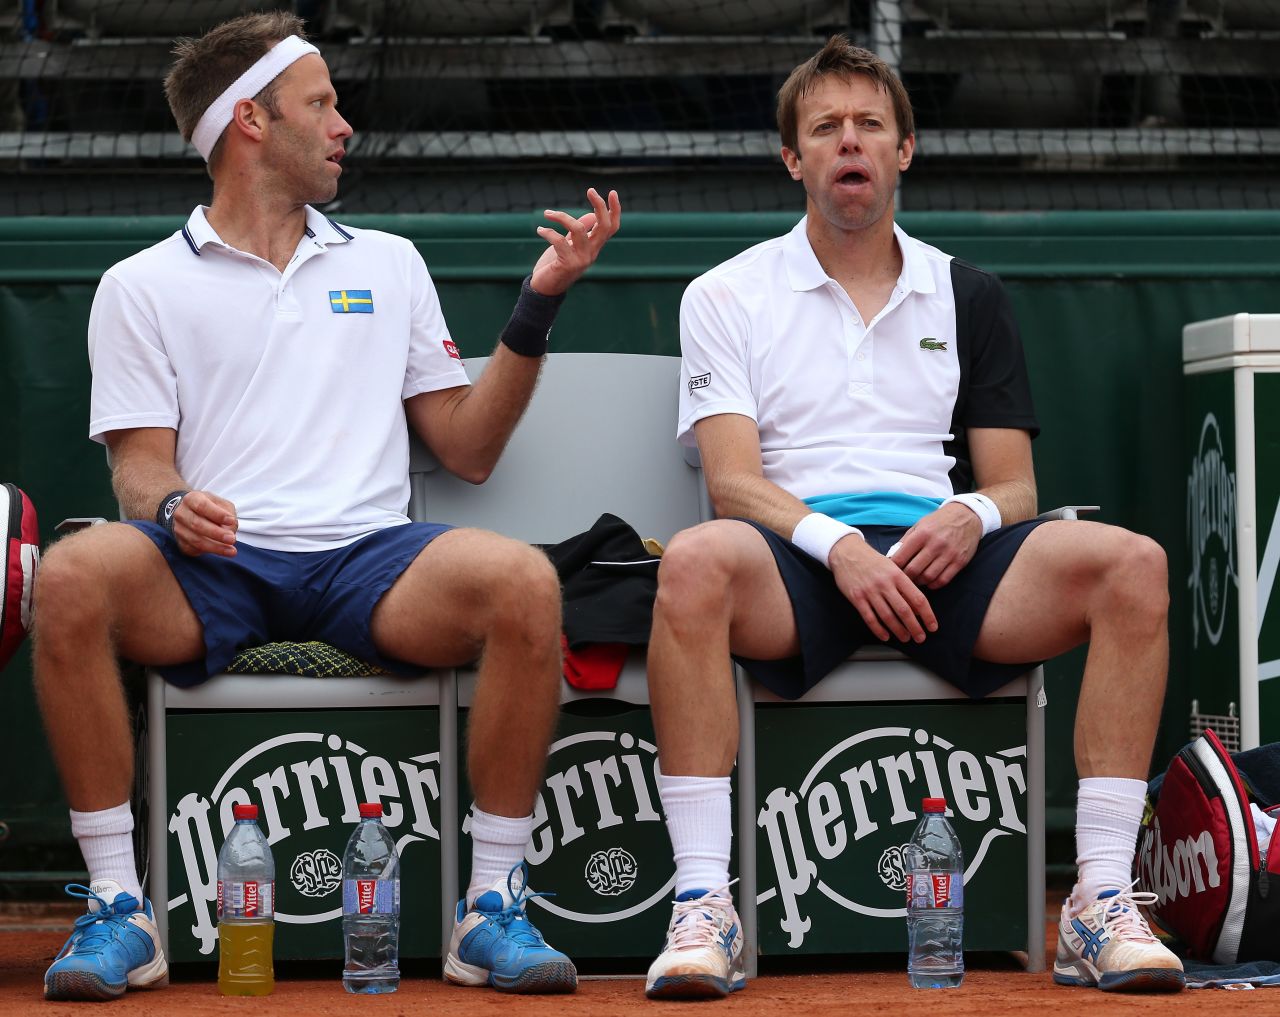 Swedish tennis player Robert Lindstedt, pictured here at the French Open in May, found the air quality in Beijing untenable, describing it on his blog as "a disaster" and questioning whether he would return to the event.